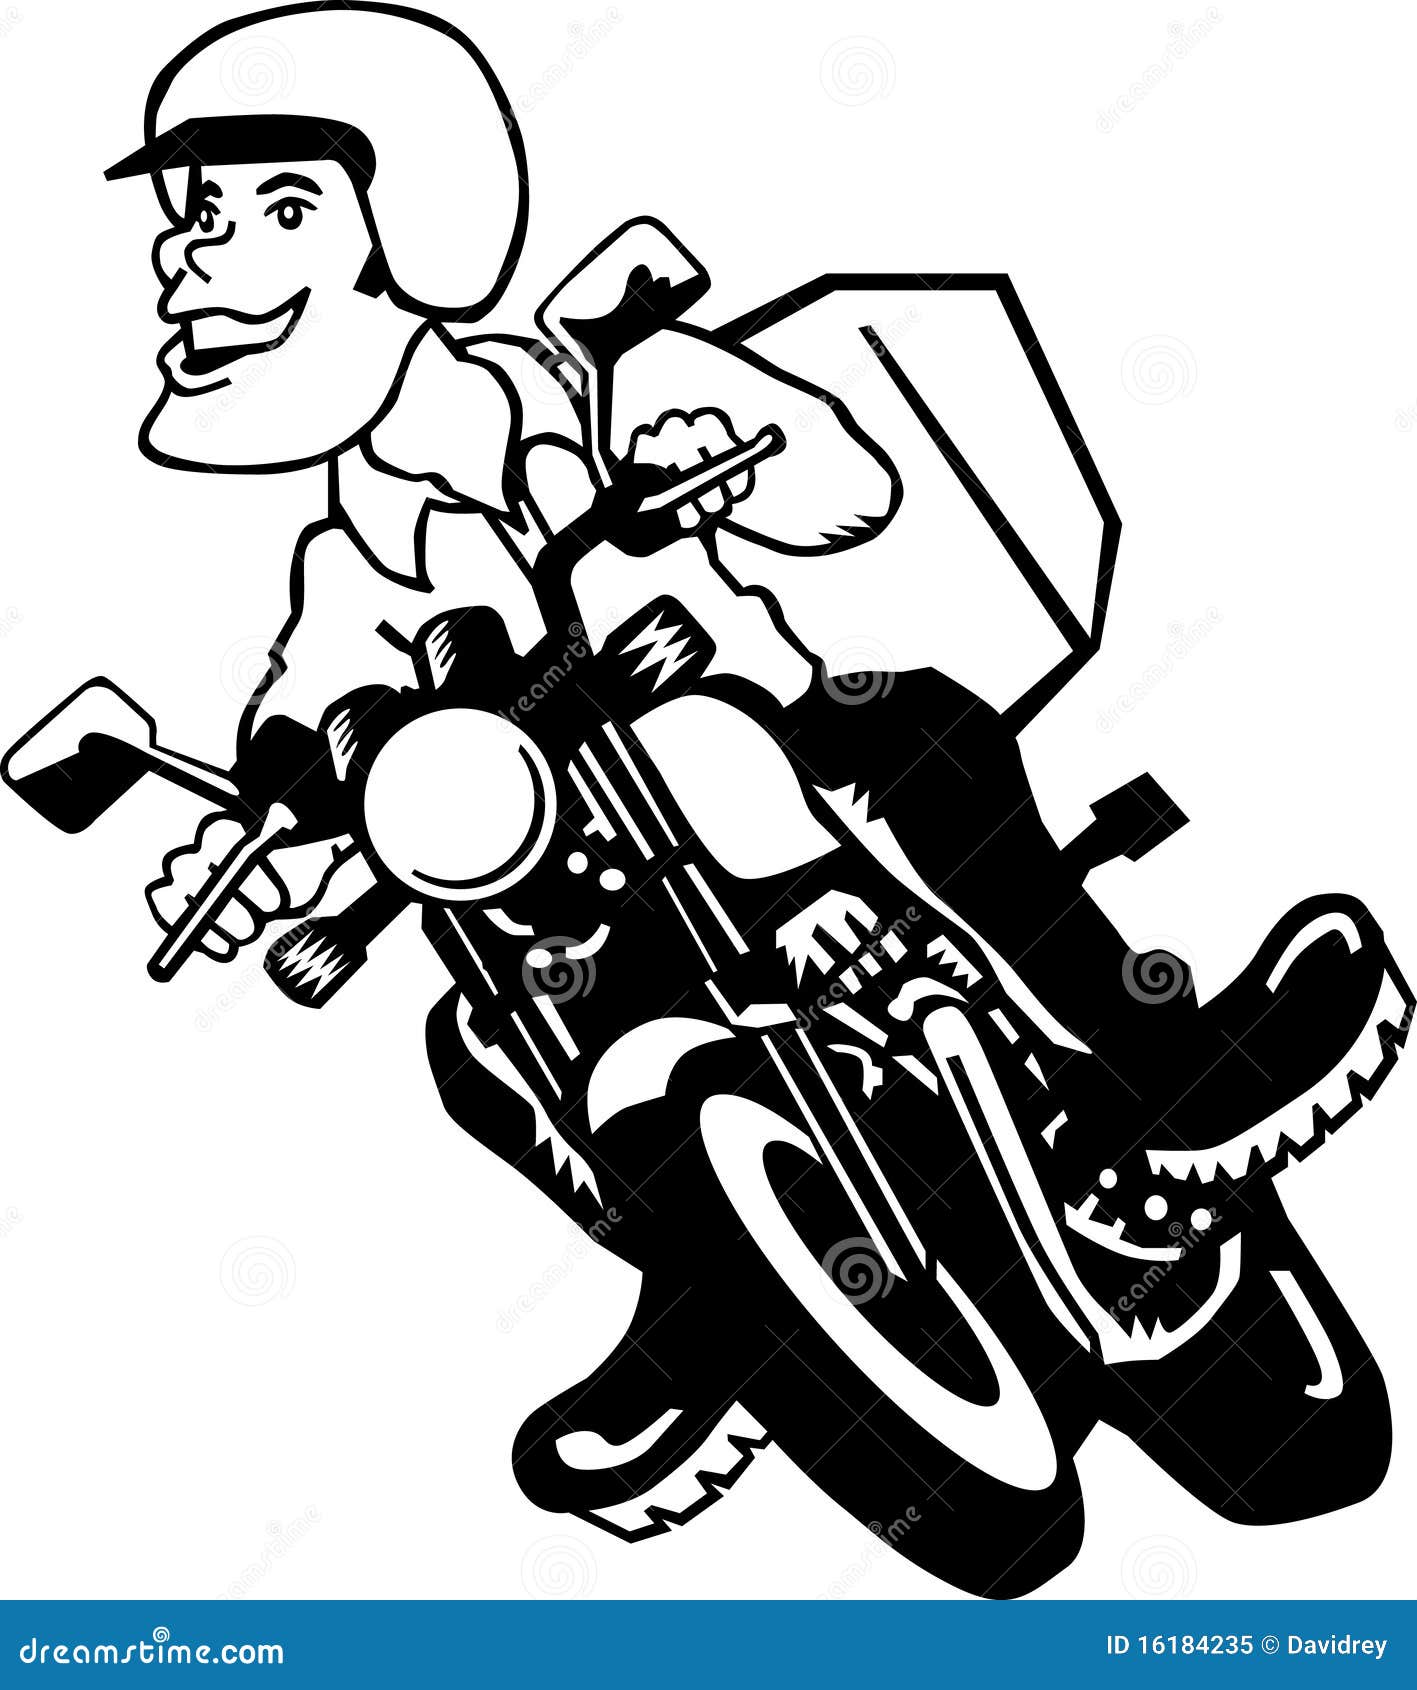 clipart delivery man - photo #44